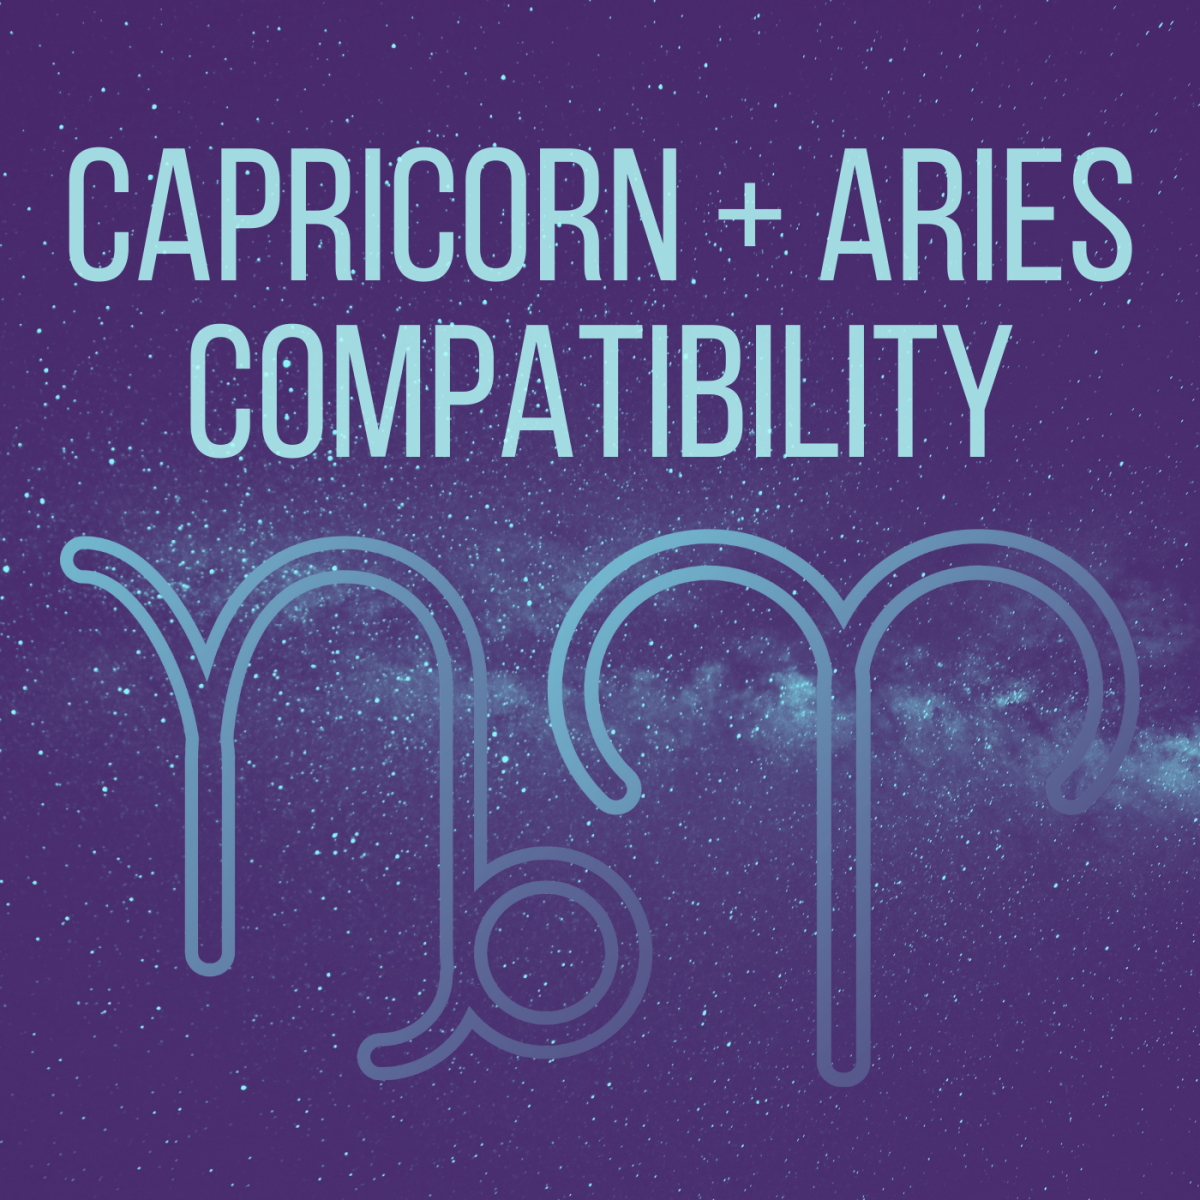 Are the goat and the ram compatible? Explore these two astrological signs.